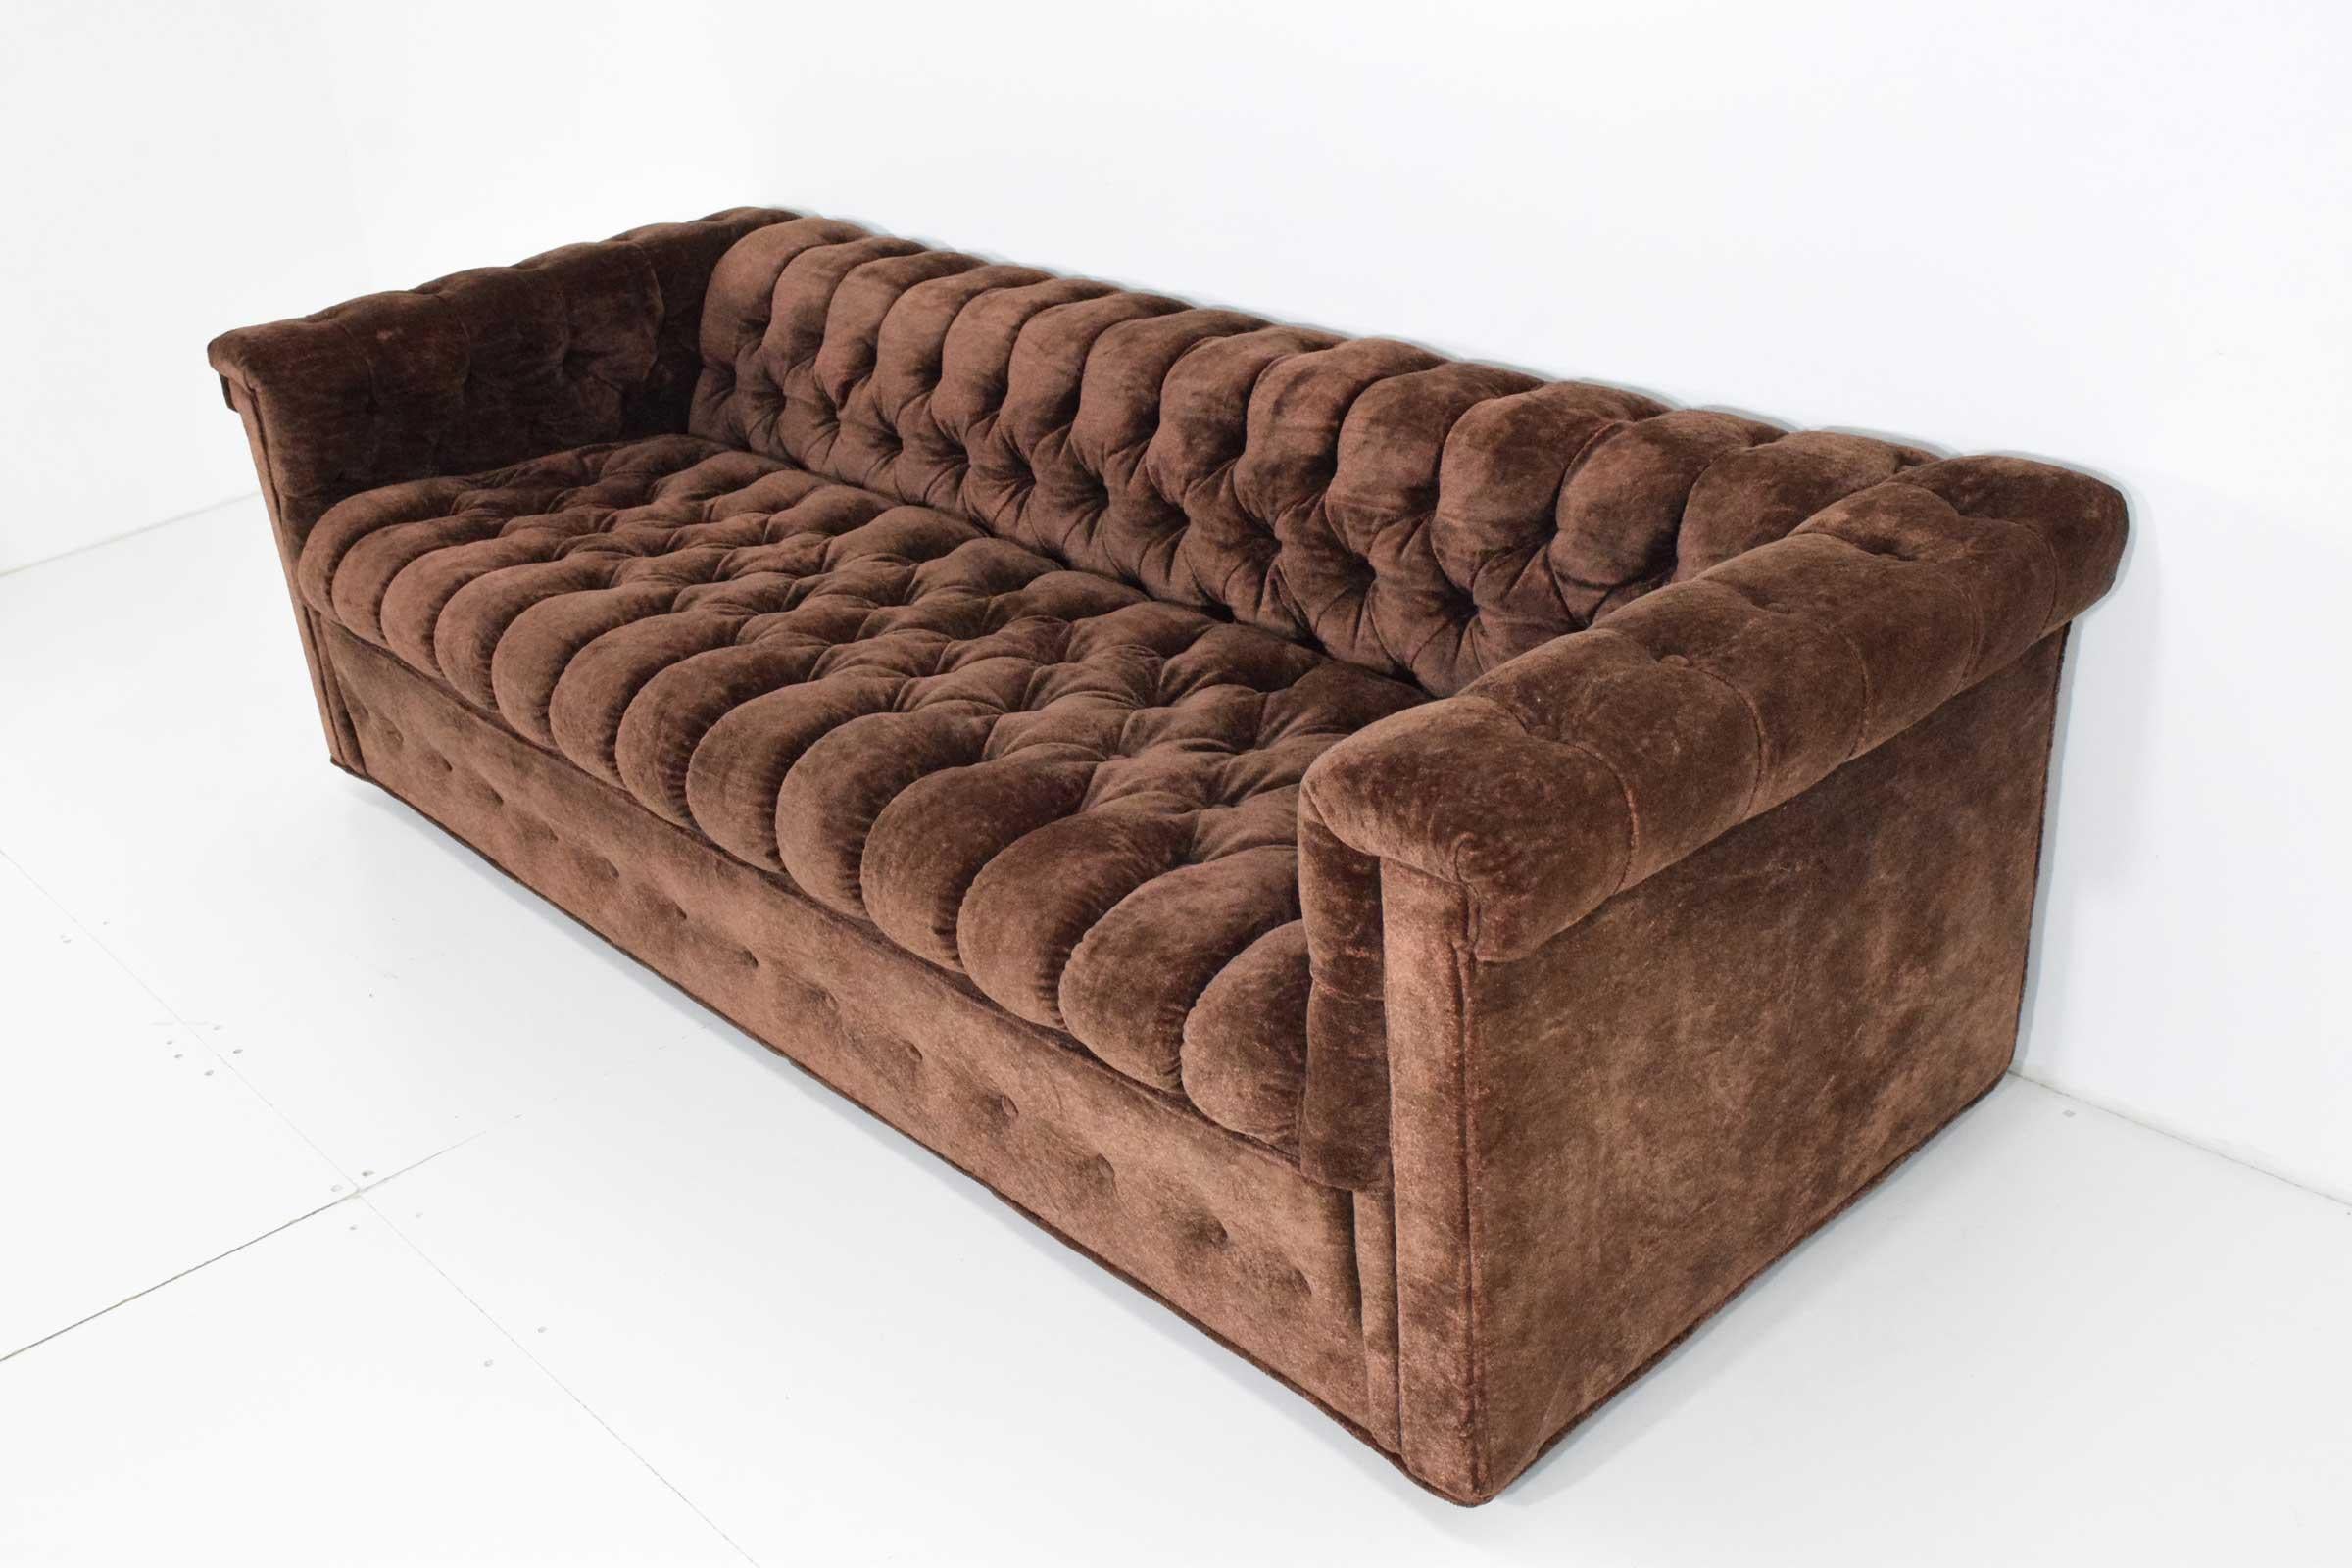 Sofas  are  plush and upholstered in a velvet. Very well constructed and velvet in very good condition. Sofa is on small casters which can be replaced with small legs if desired.